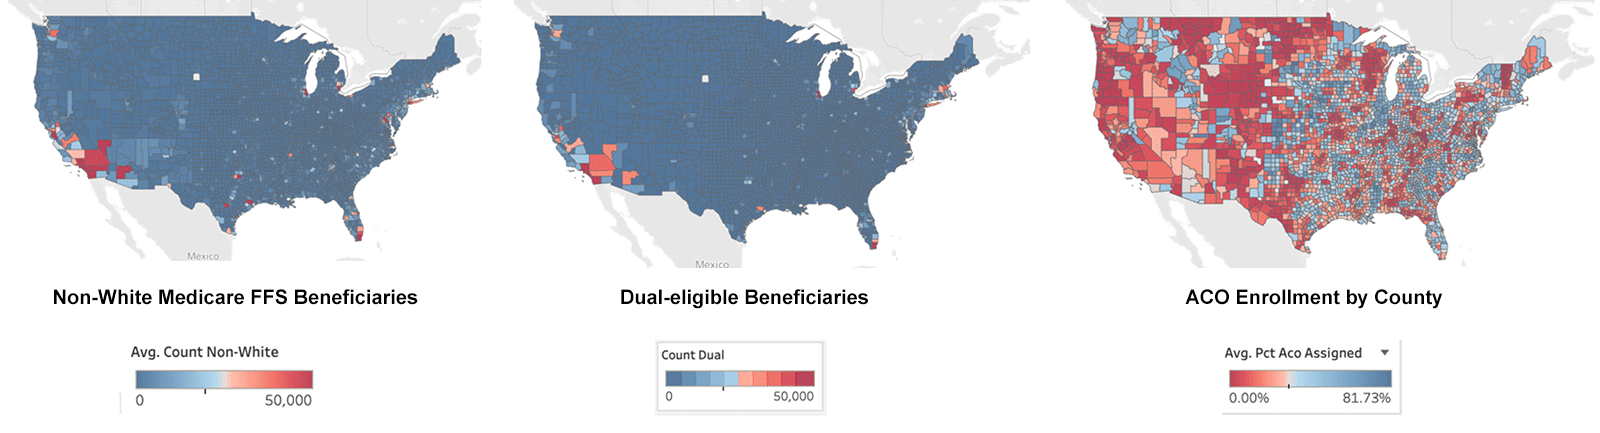 Figure 9 Locations of Non-White, Dual Eligible, and ACO Enrolled Beneficiaries, 2021. All data sourced from CareJourney.